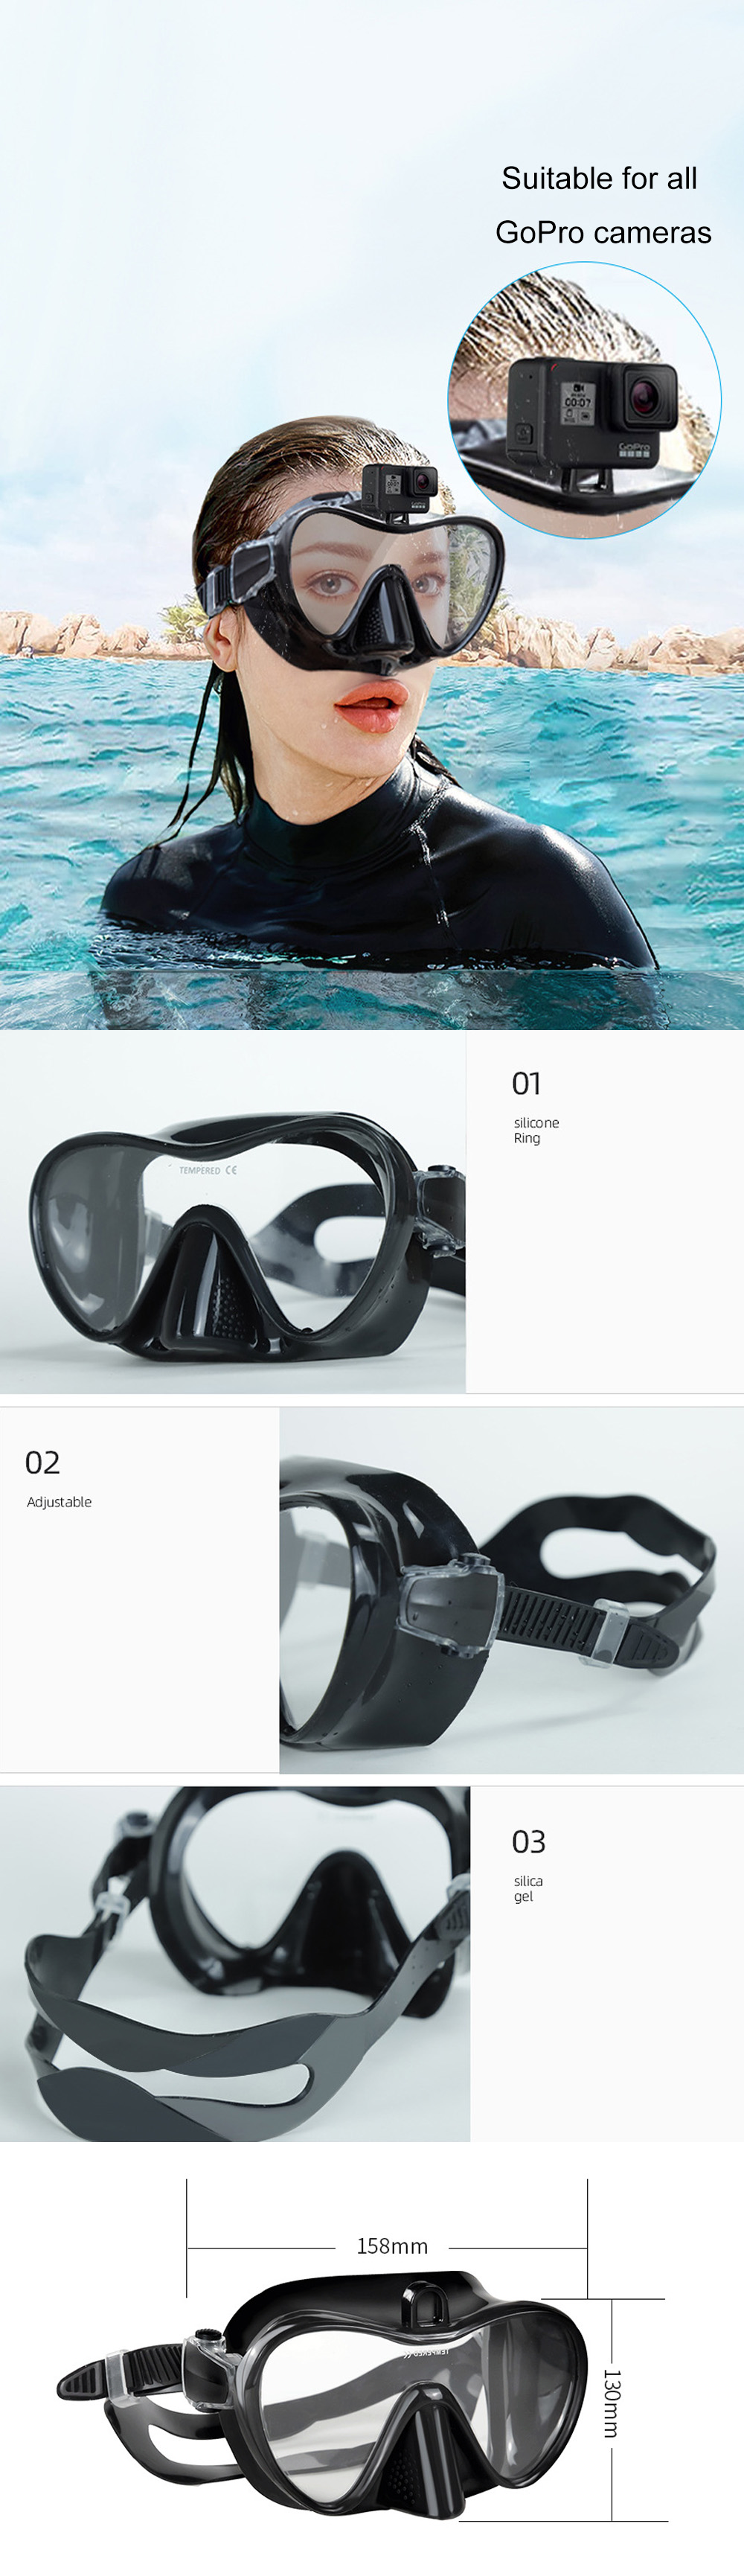 Diving-Silicone-Mask-Breathing-Tube-Snorkel-Mask-HD-Diving-Glasses-Outdoor-Swimming-Diving-1855991-6